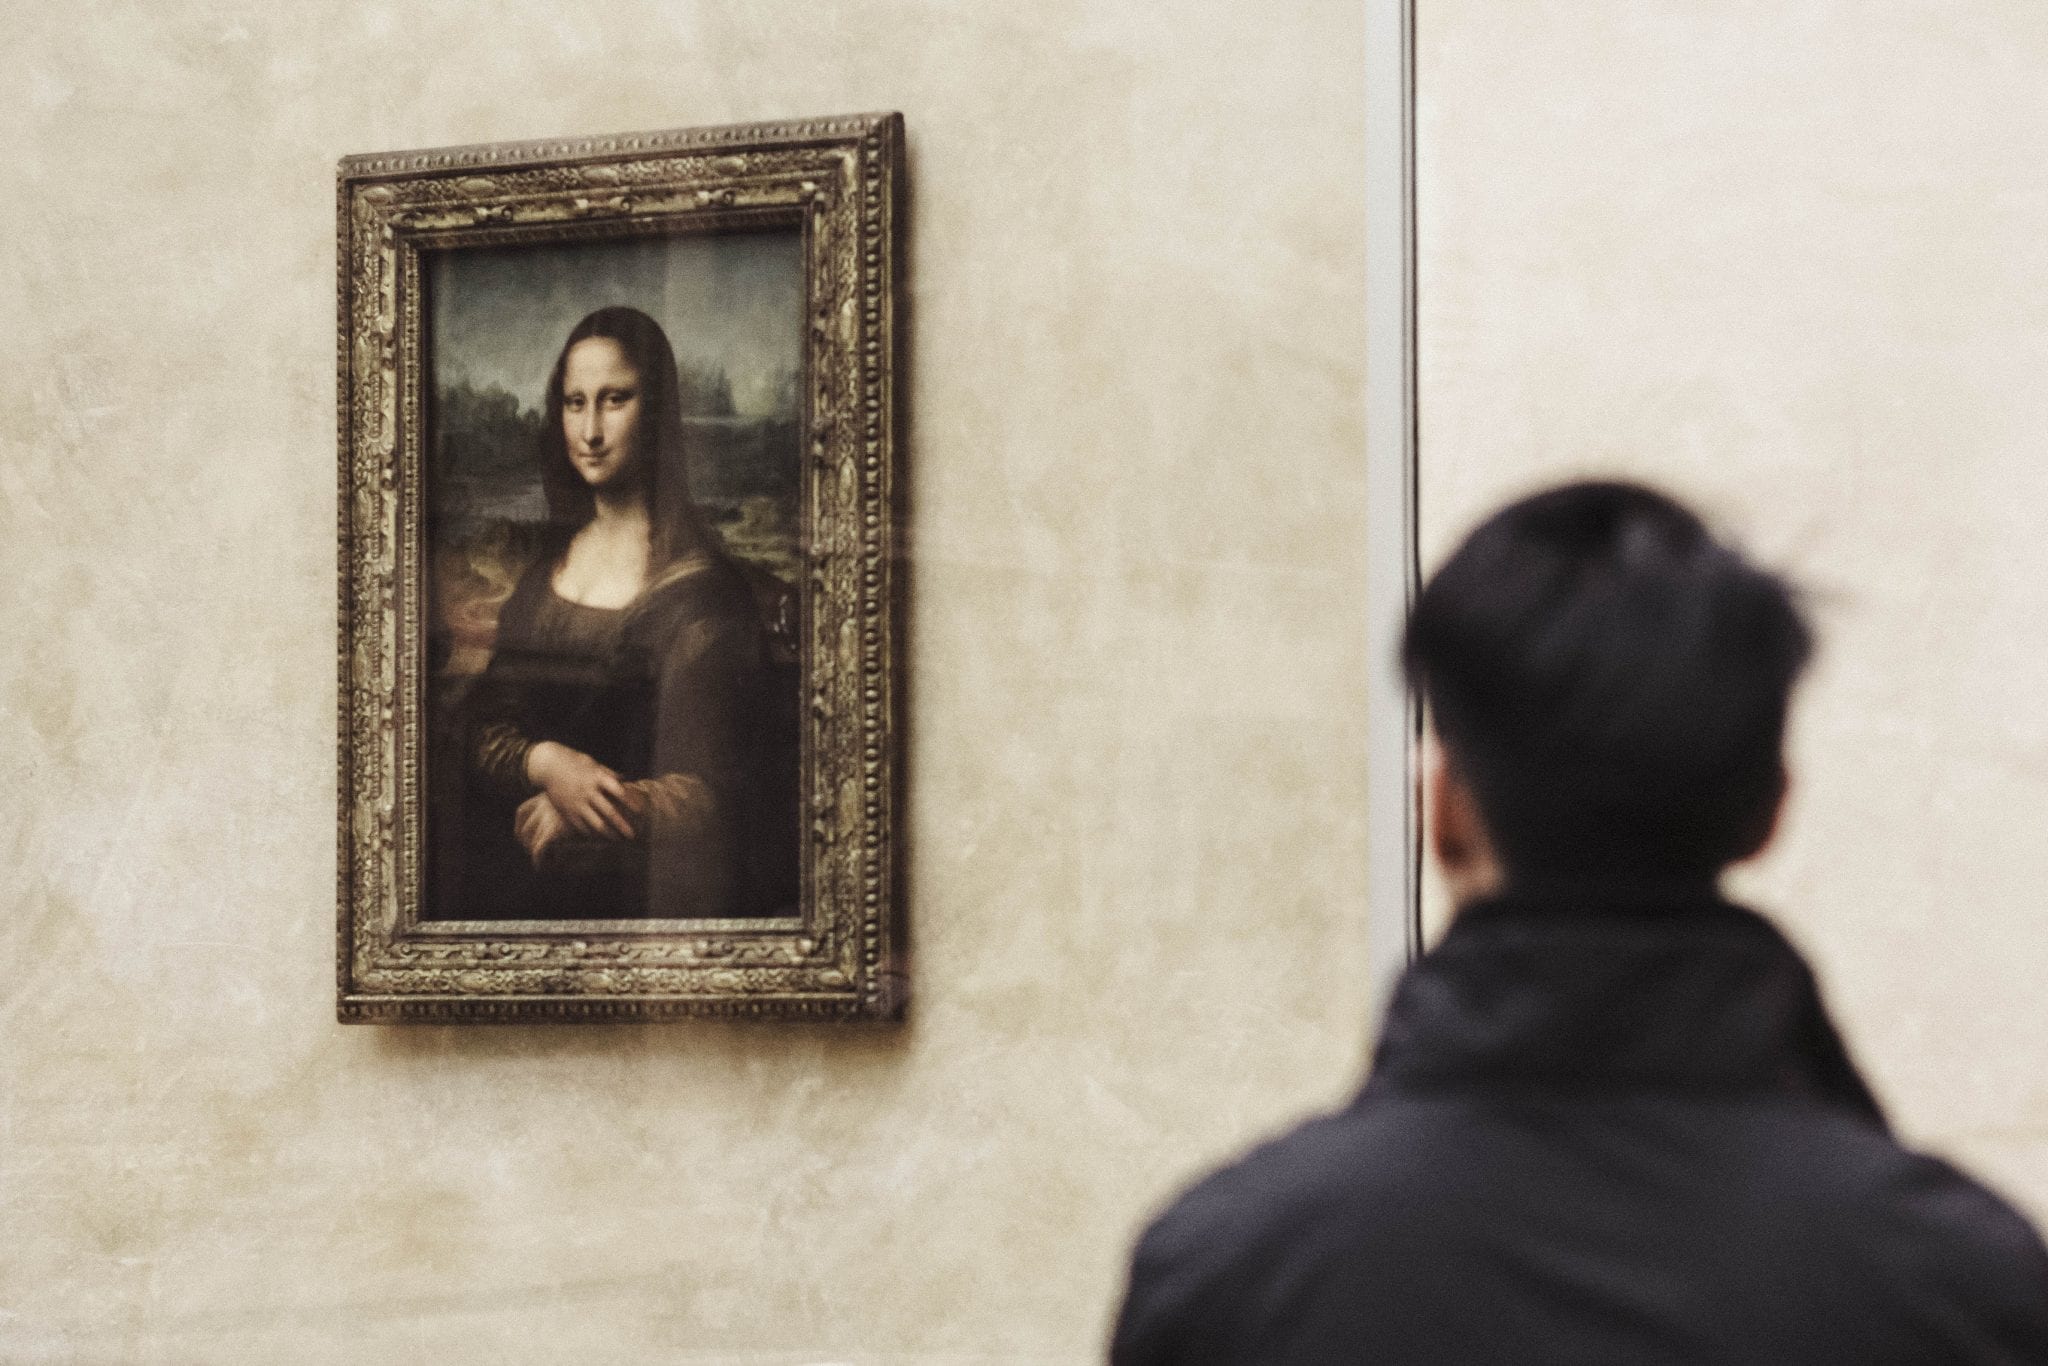 Disappointing Tourist Destinations - The Mona Lisa